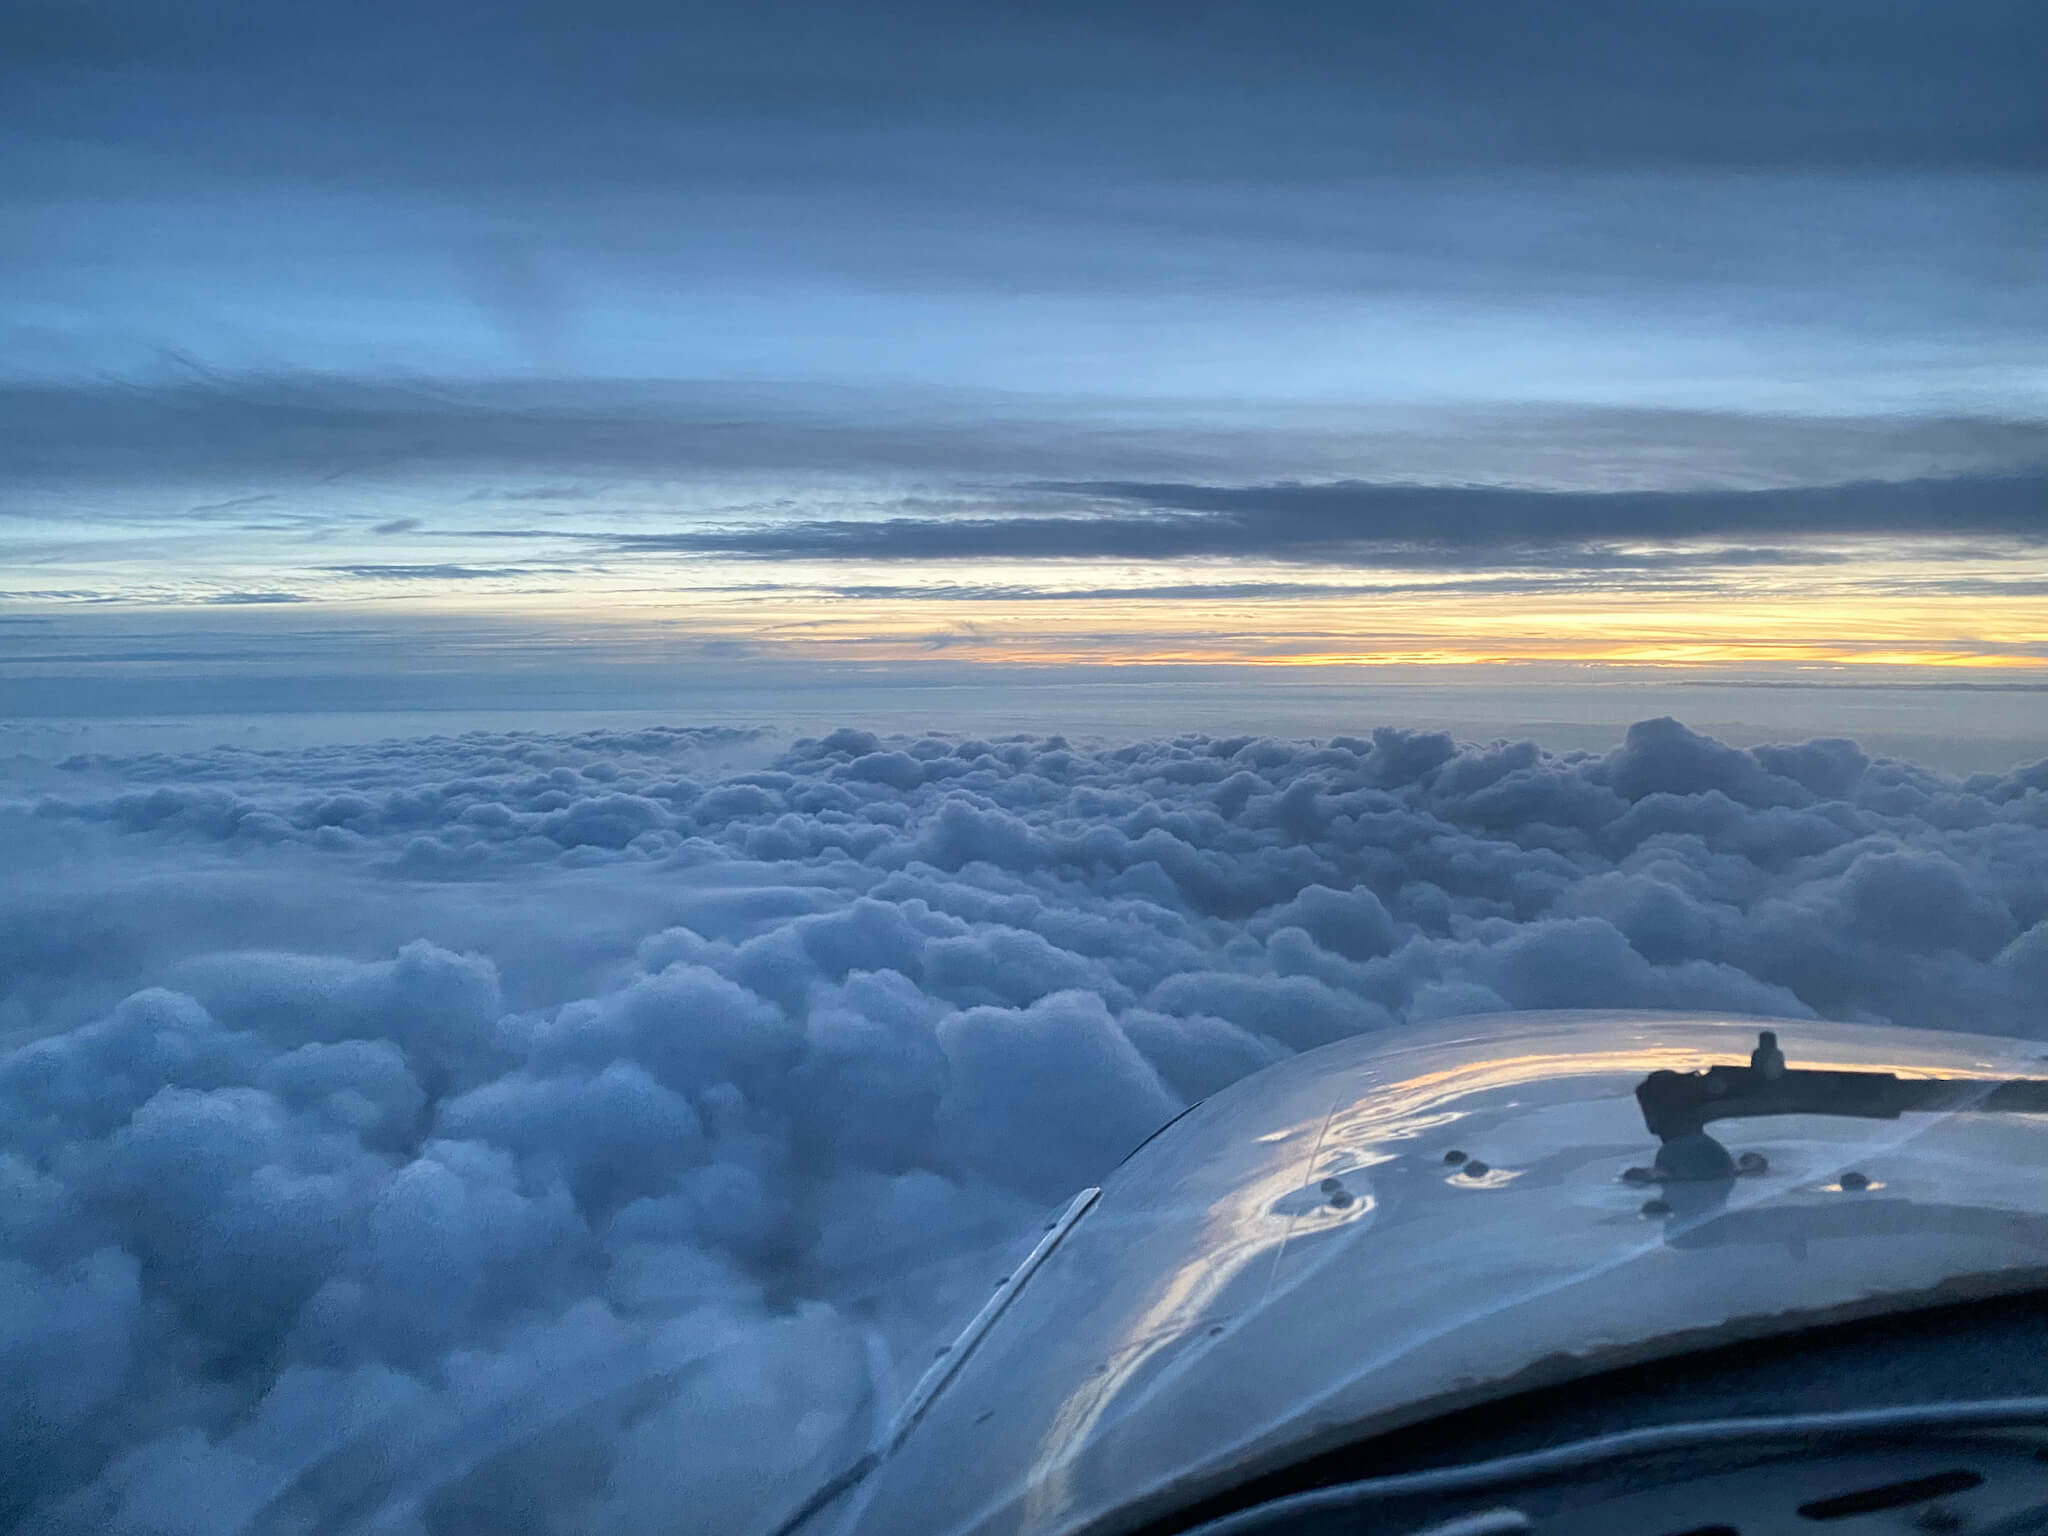 Dusk seen from PA31 cockpit over a bed of clouds